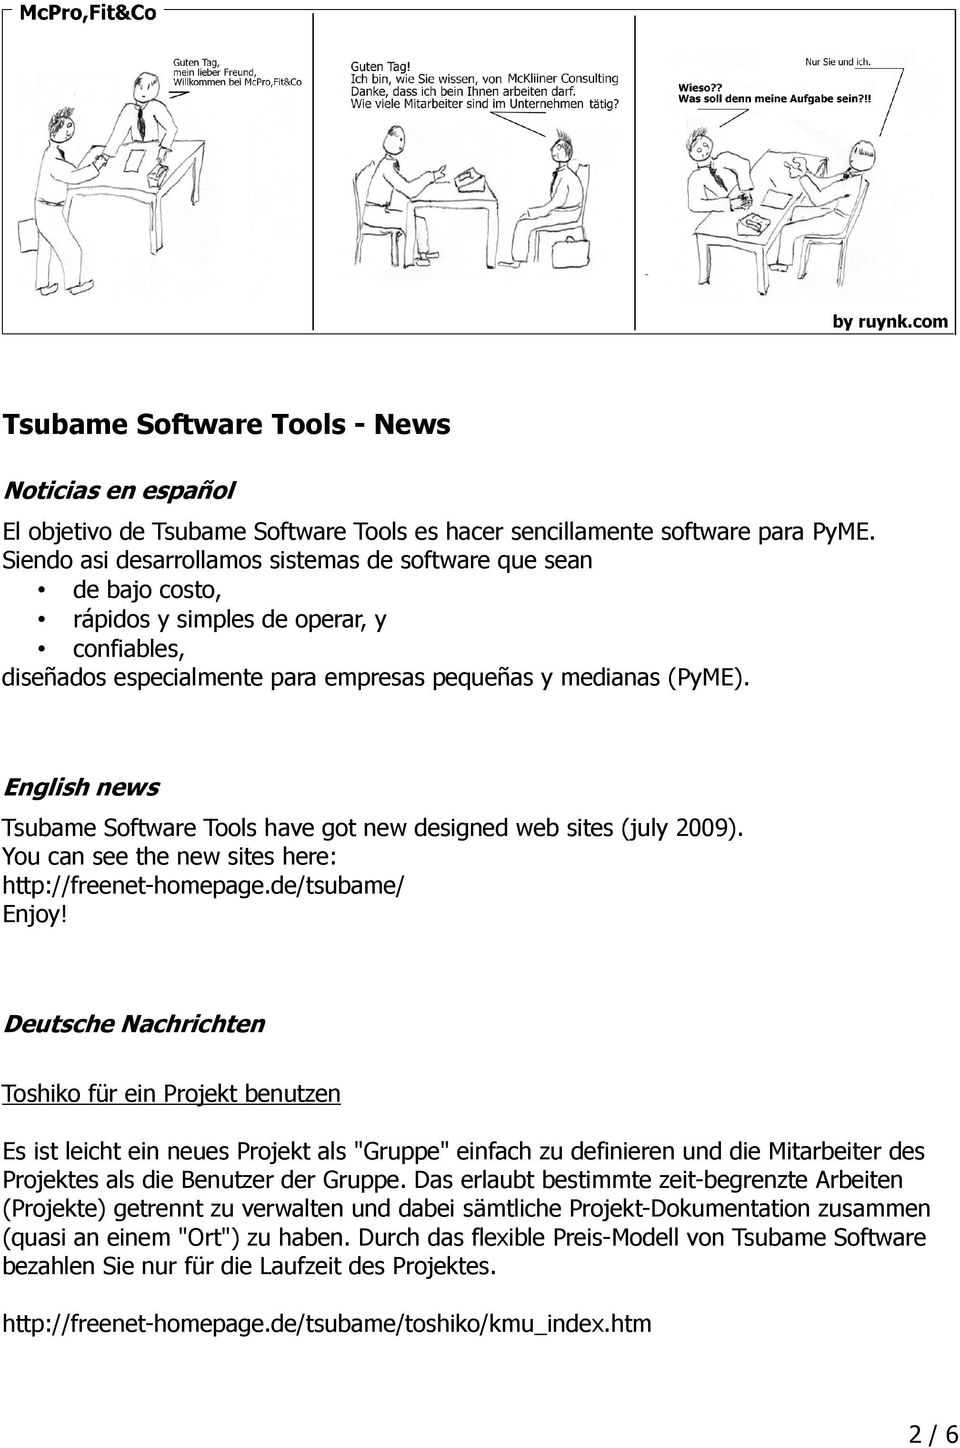 English news Tsubame Software Tools have got new designed web sites (july 2009). You can see the new sites here: http://freenet-homepage.de/tsubame/ Enjoy!